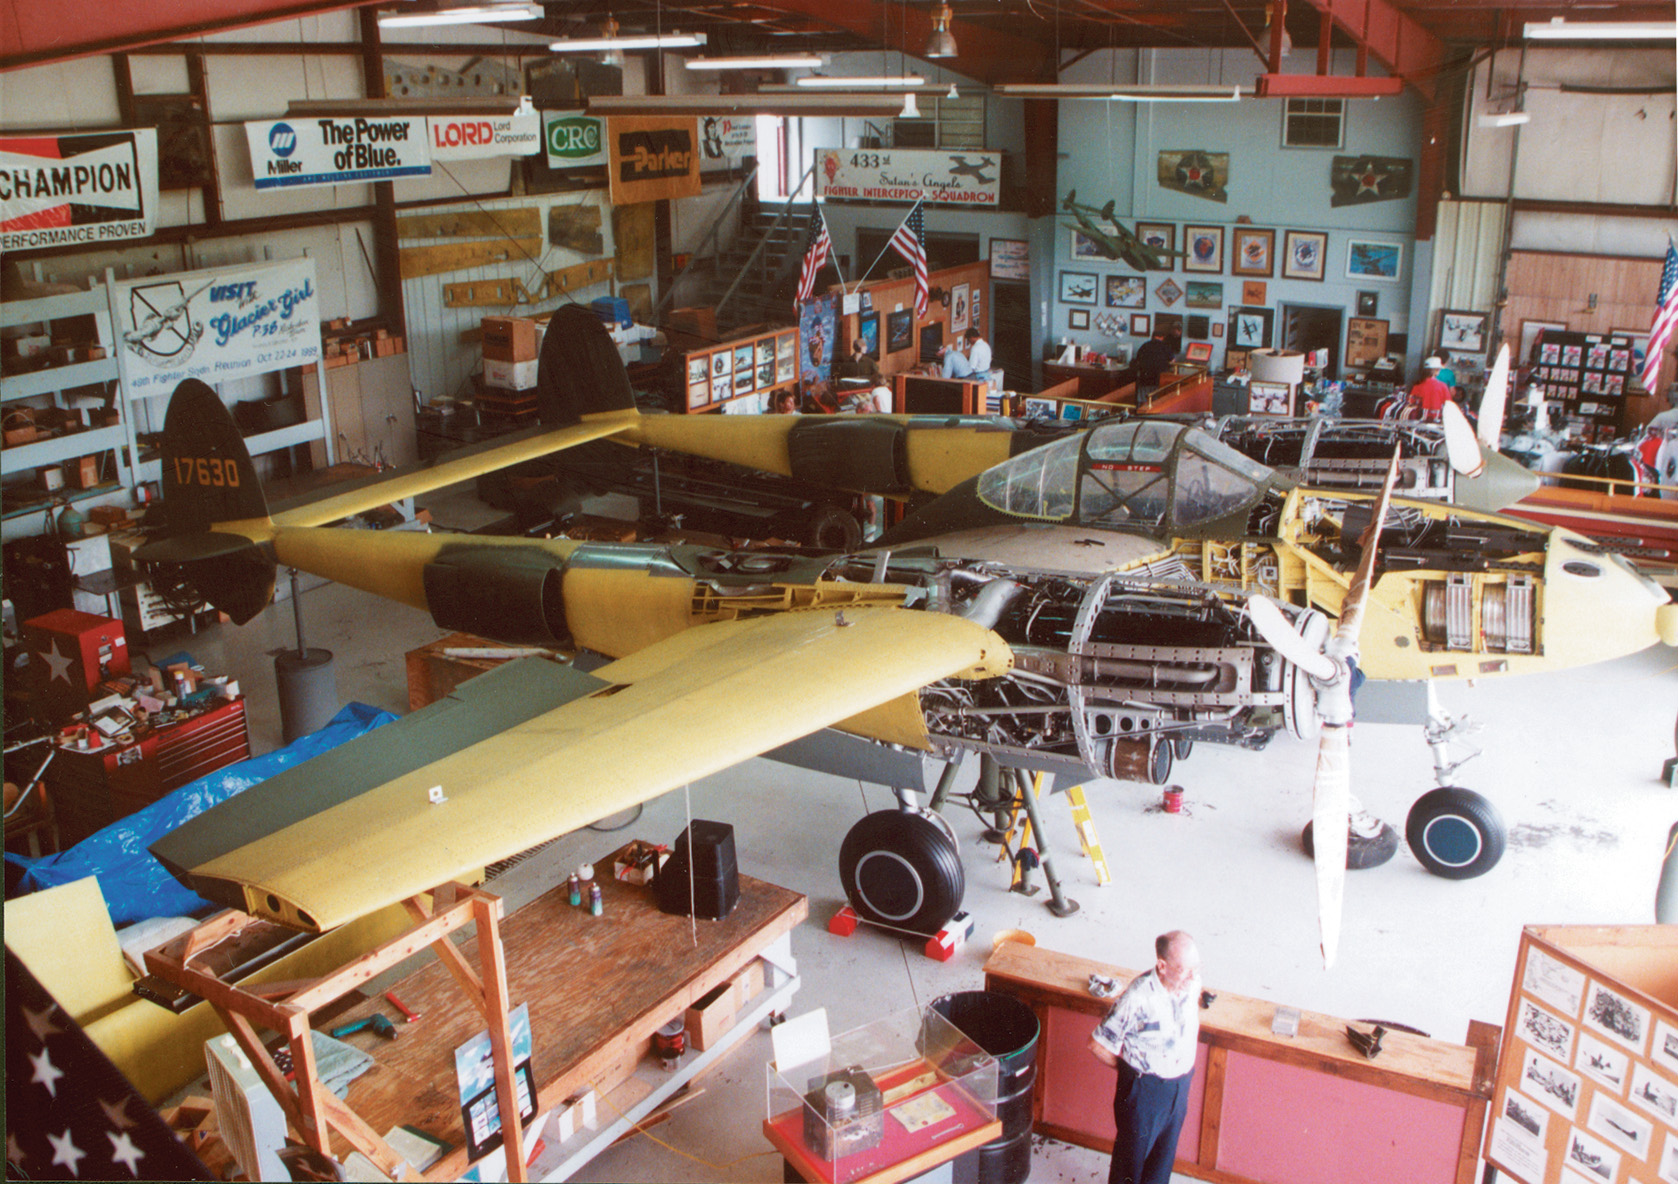 Undergoing extensive restoration, the P-38 dubbed “Glacier Girl” sits inside the working museum at Middlesboro, Ky.